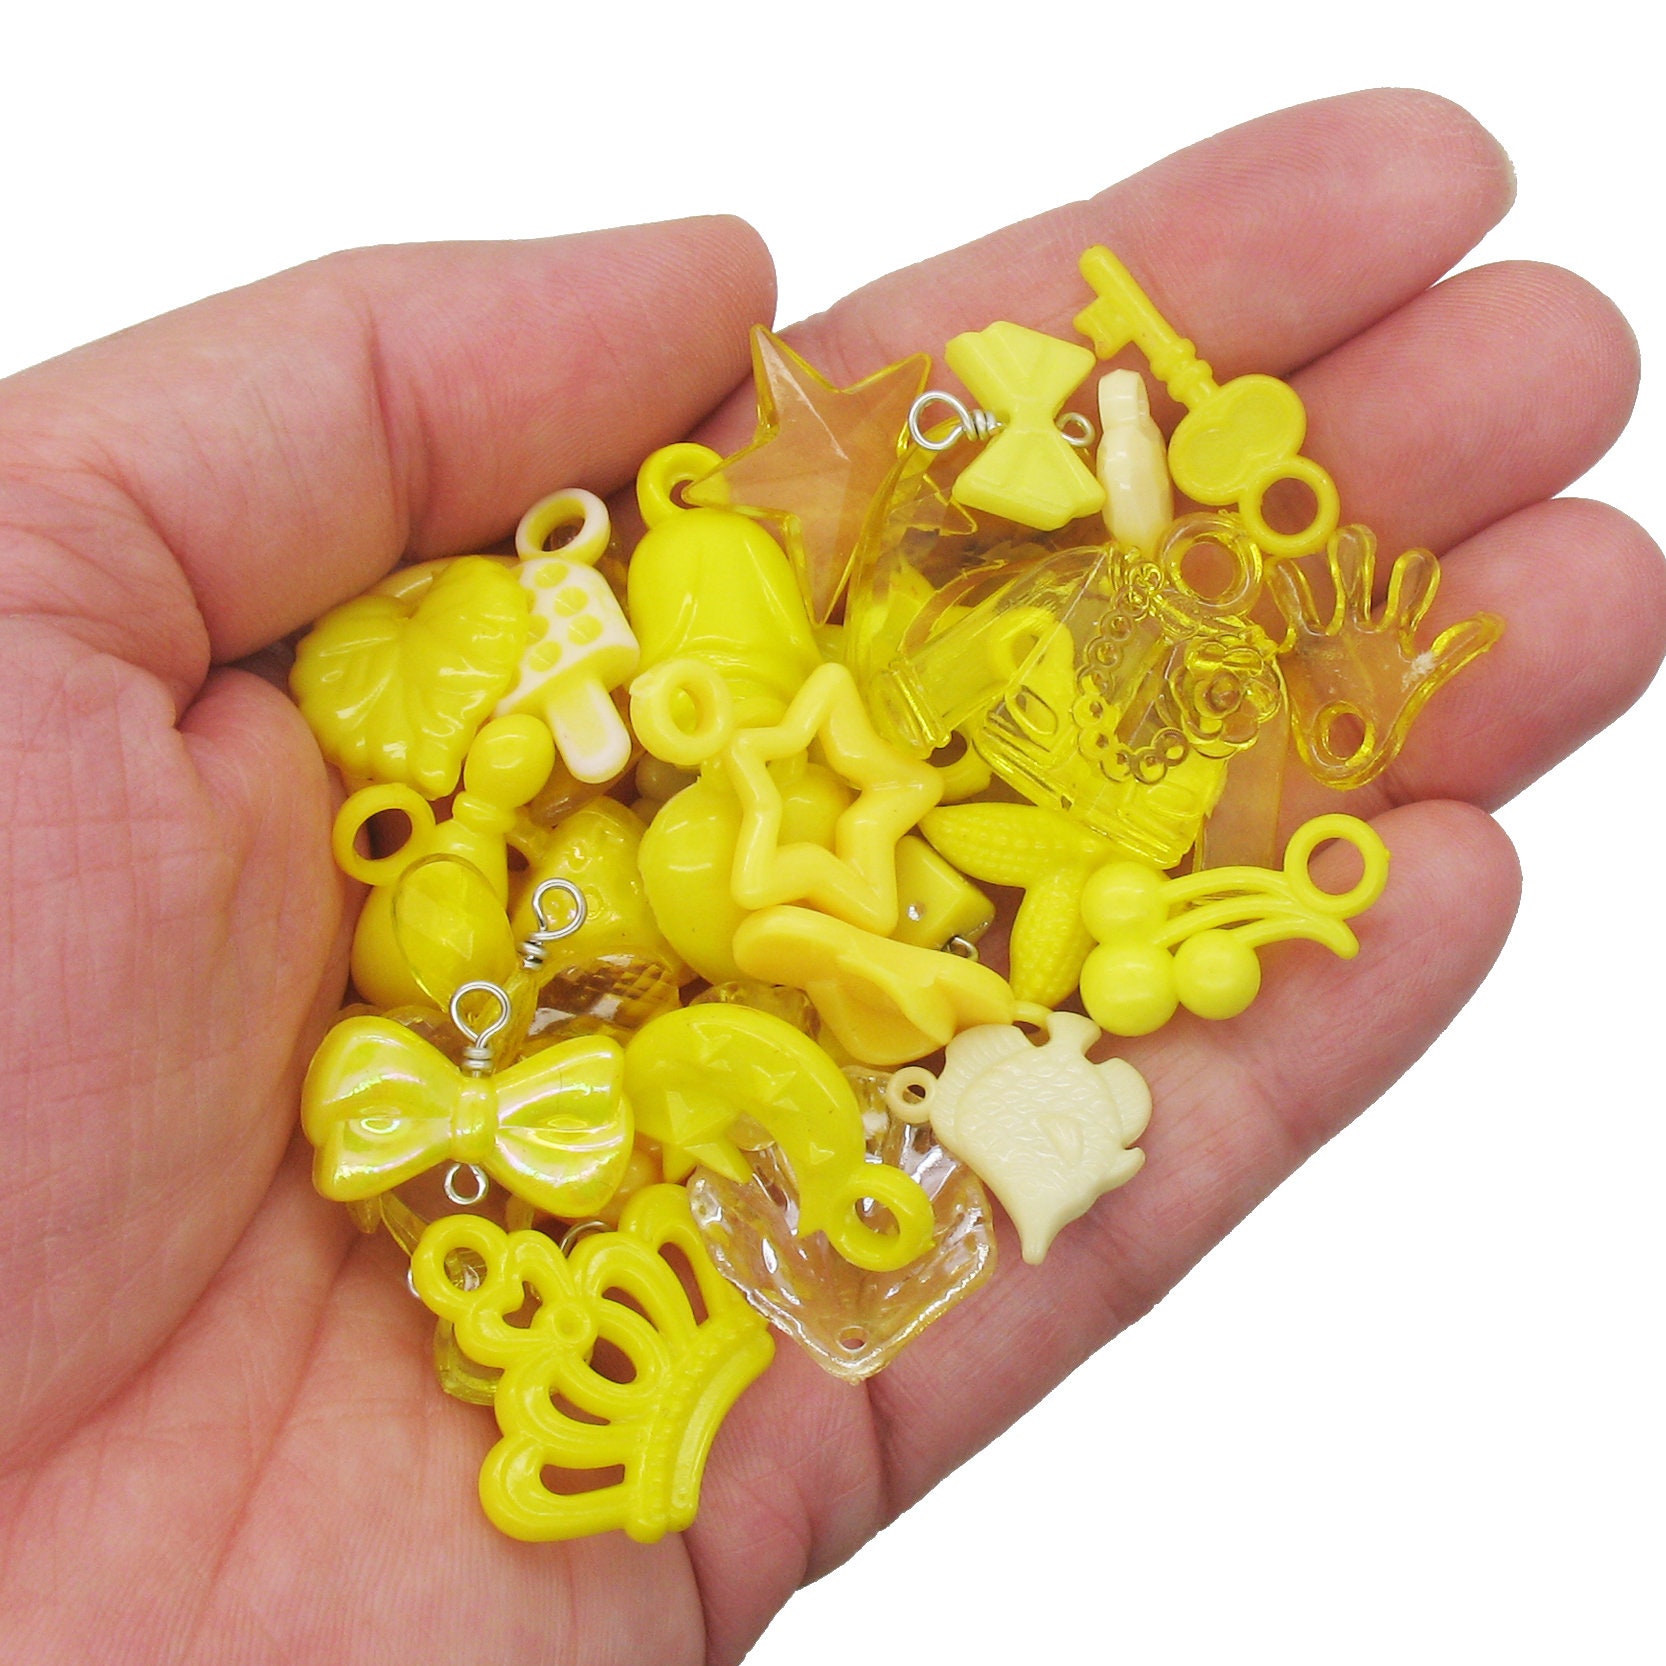 Bulk Acrylic Charms, 100 Colorful Plastic Charm Mix, Assorted Shapes,  Adorabilities